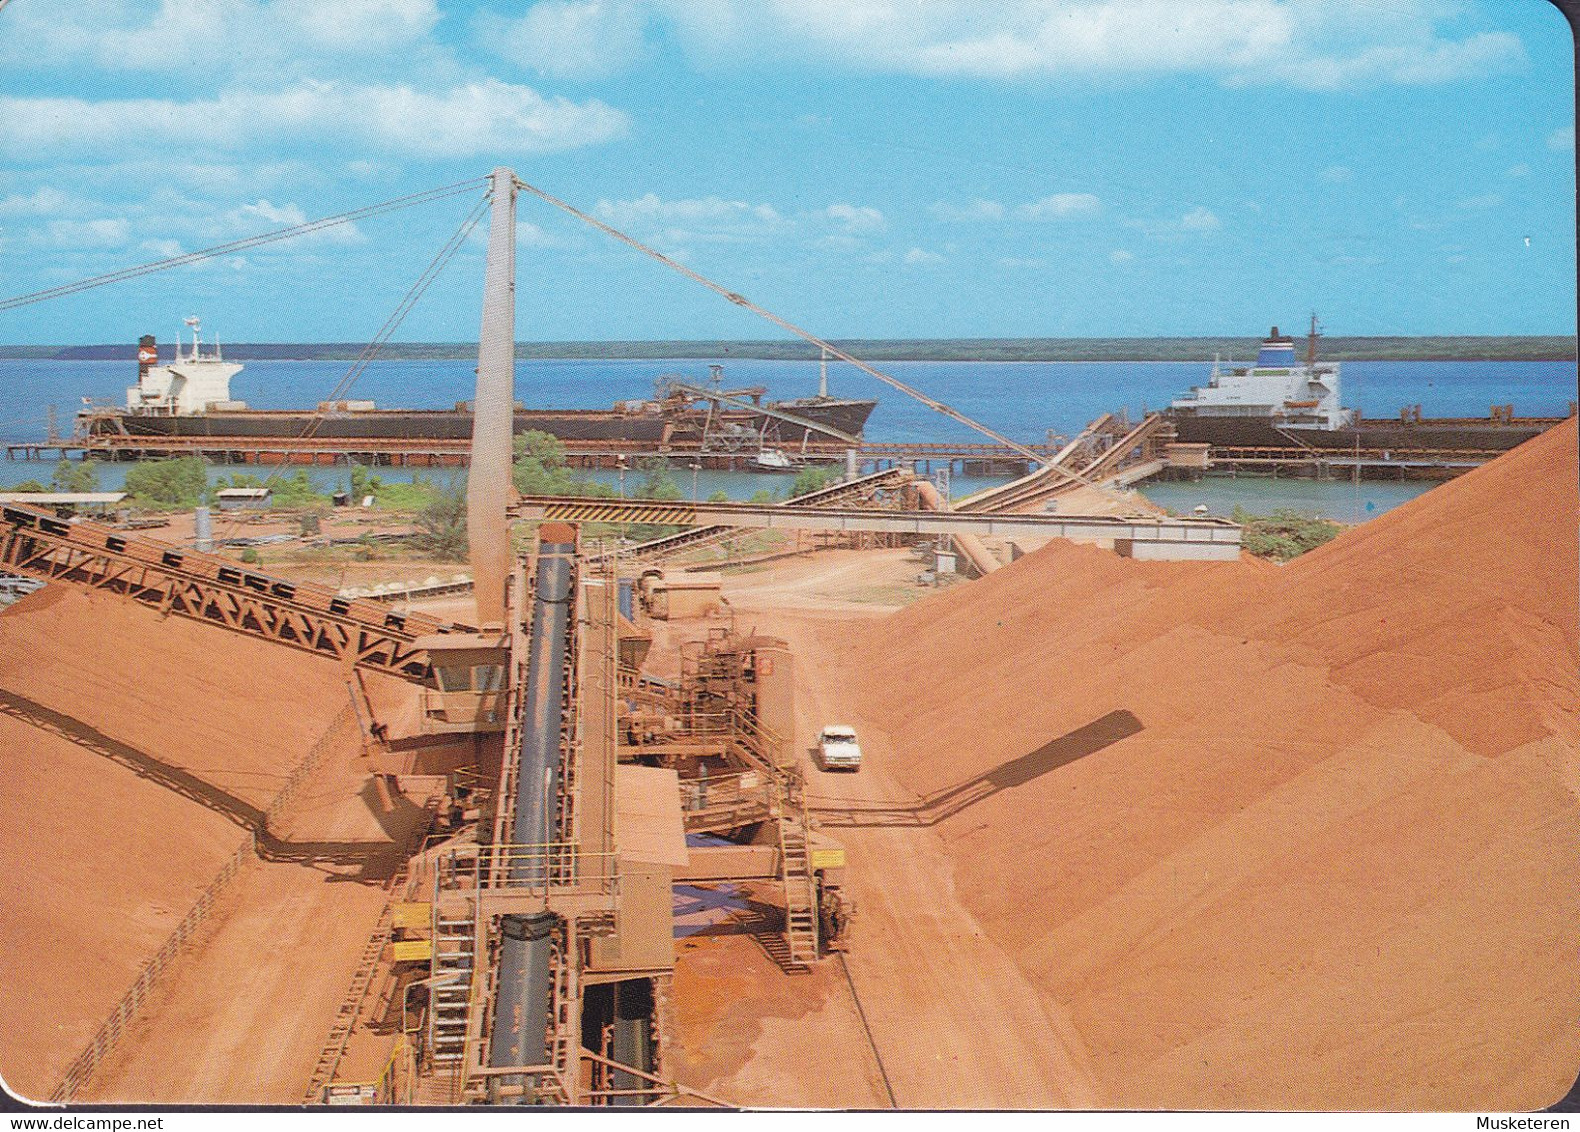 Australia PPC Weipa Ore Stacker With Ship-loading AIR MAIL Label CAIRNS Mail Centre QLD. 1988 GENTOFTE Denmark (2 Scans) - Cairns